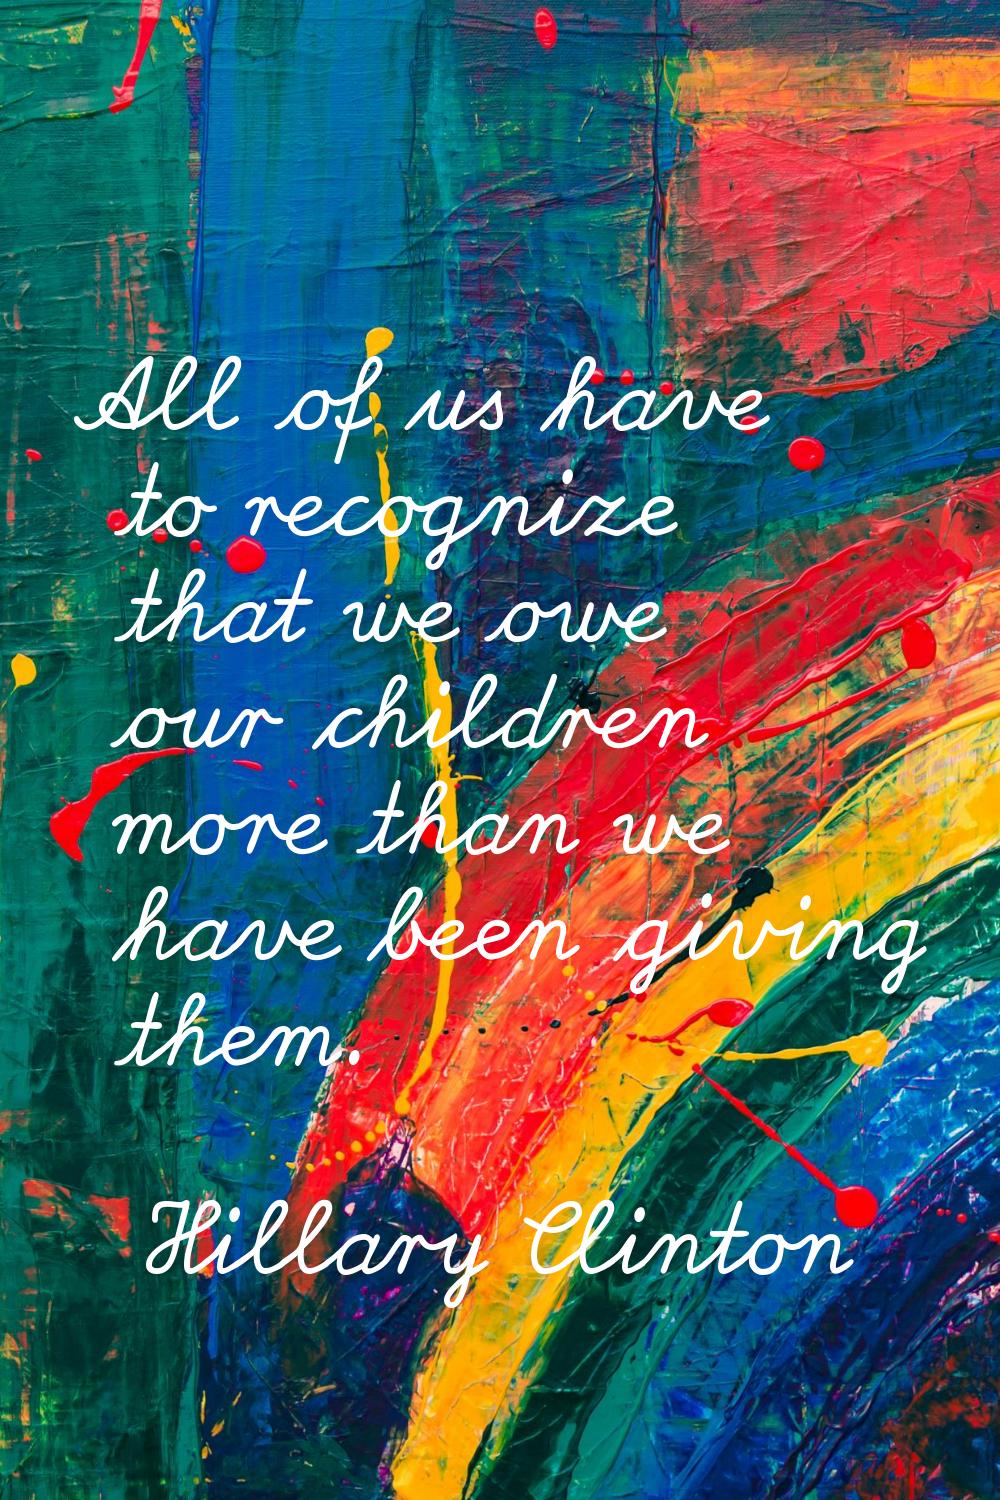 All of us have to recognize that we owe our children more than we have been giving them.